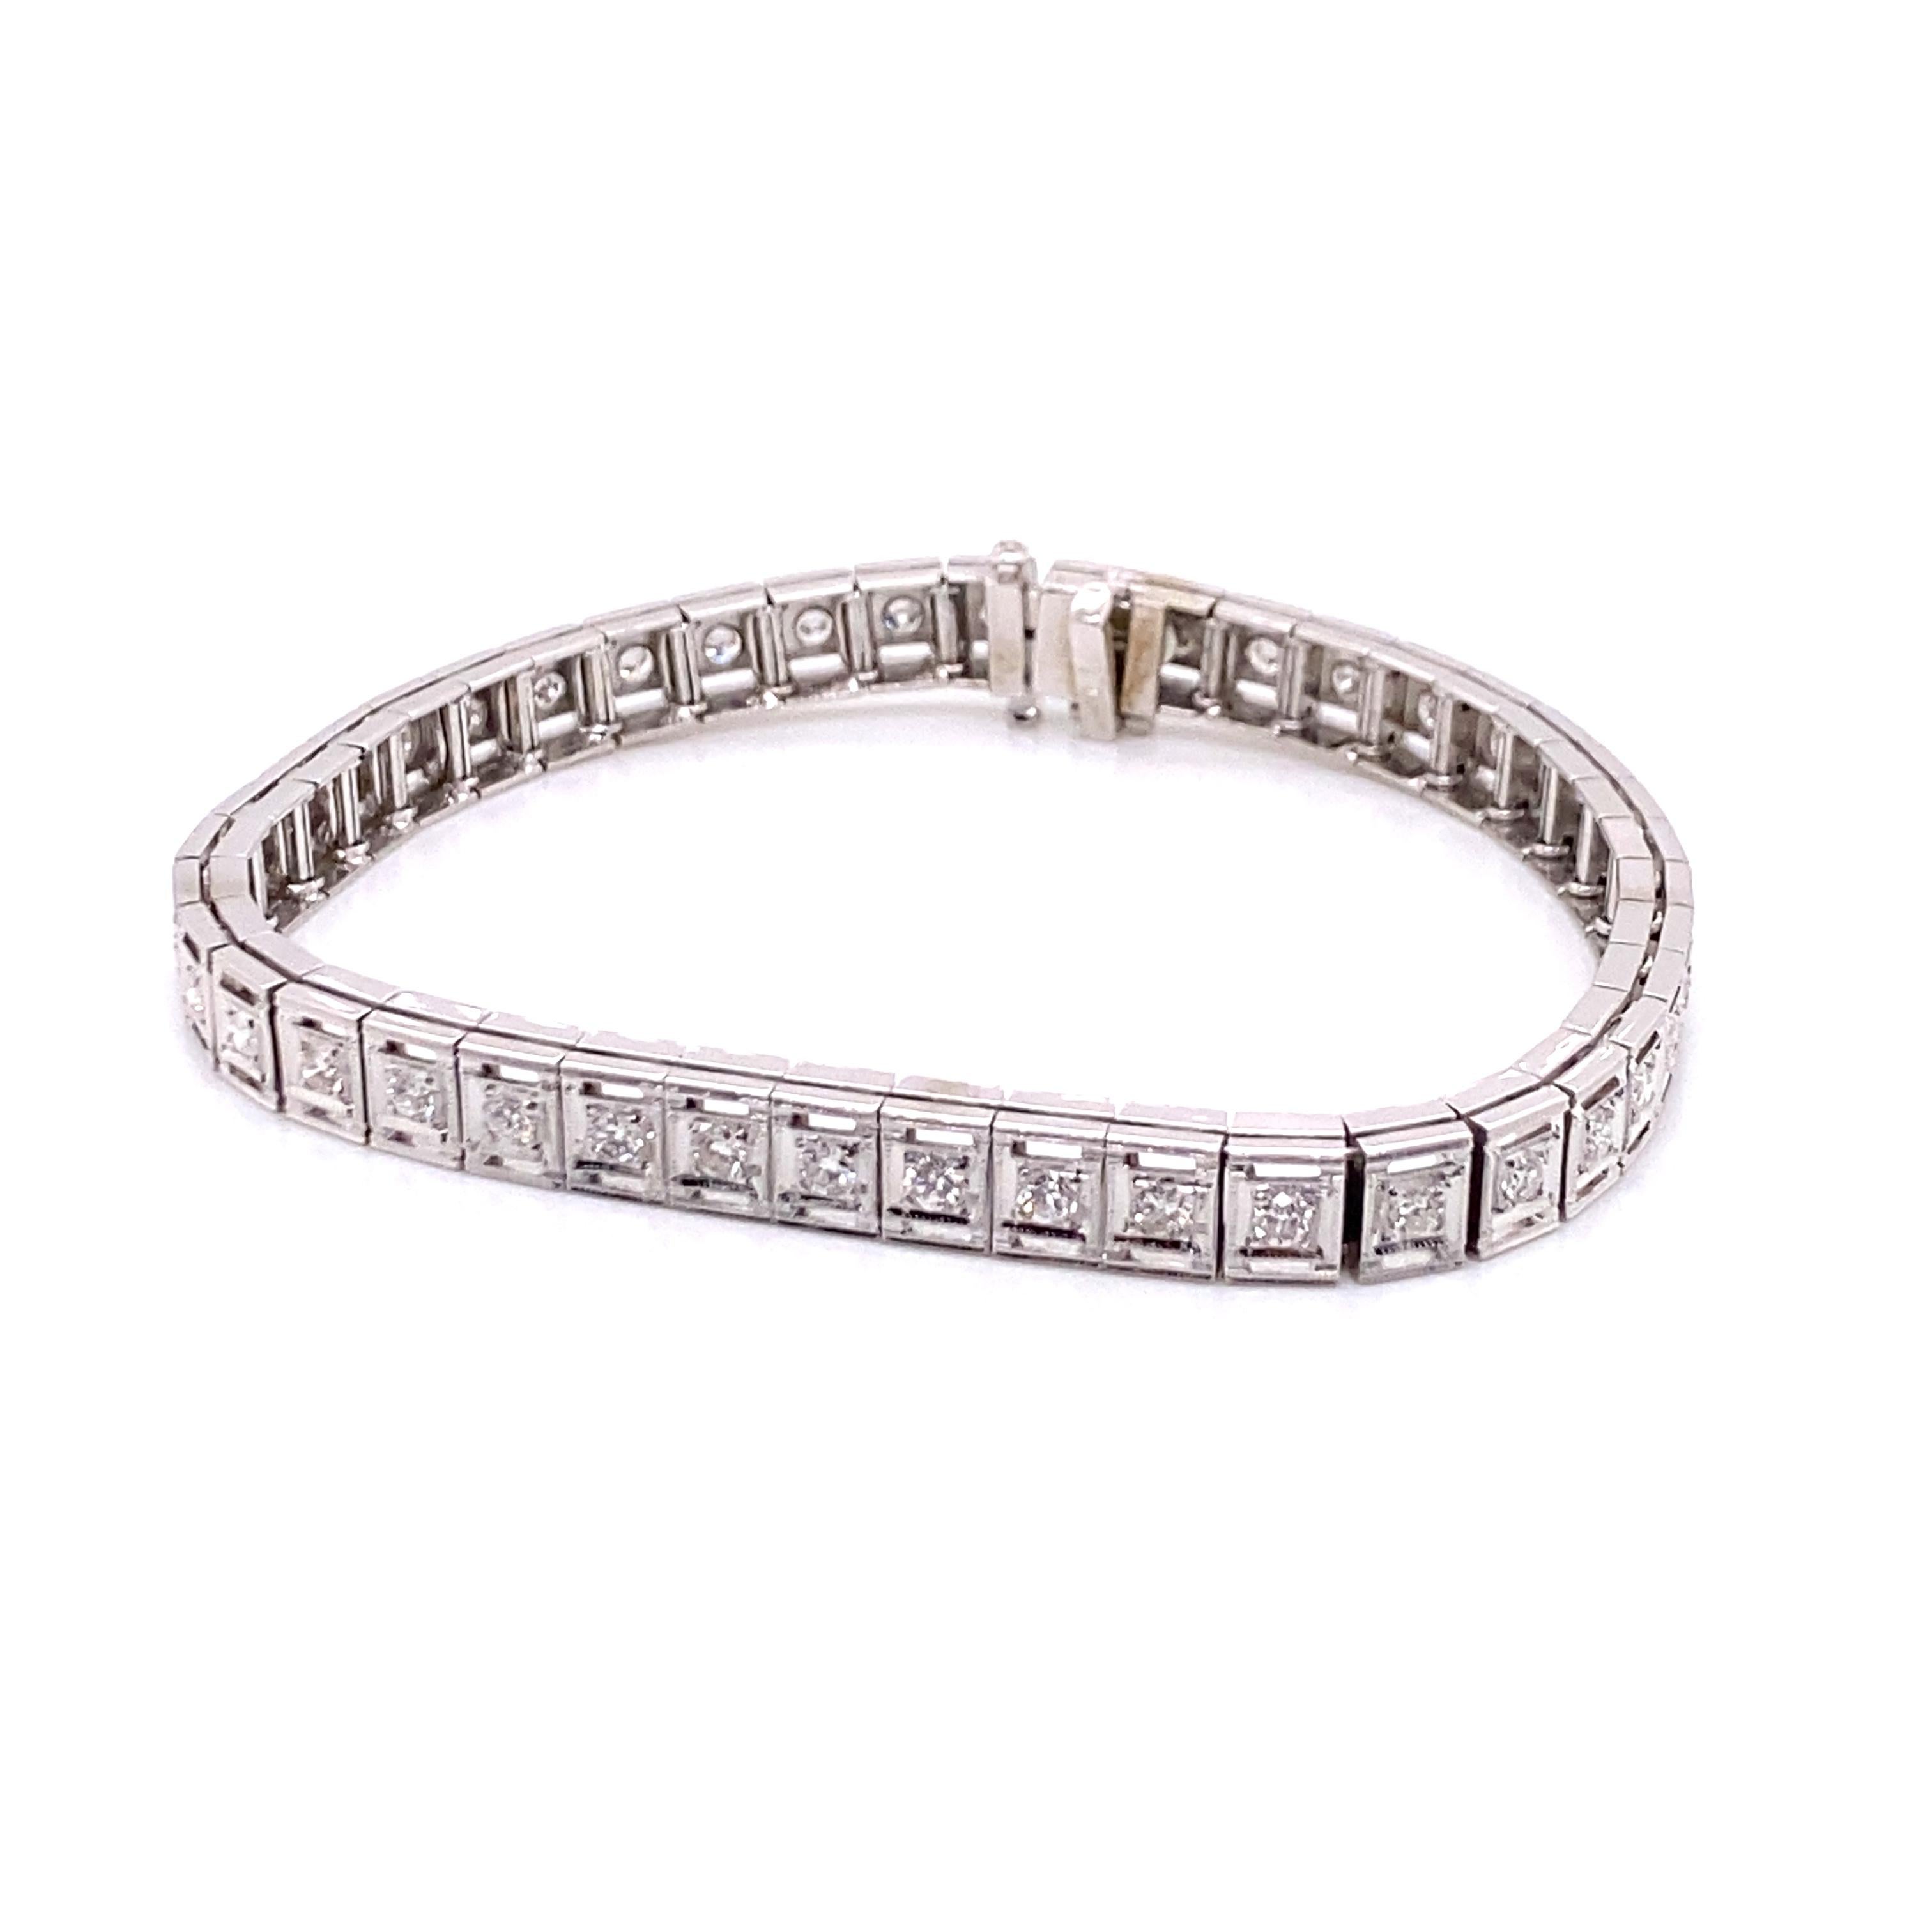 Vintage 1950's 14K White Gold Diamond Tennis Bracelet 1.26ct - The line box style bracelet contains 42 round diamonds weighing approximately 1.26ct with G - H color and SI clarity. The bracelet measures 6.75 inches long and .25 inches wide and